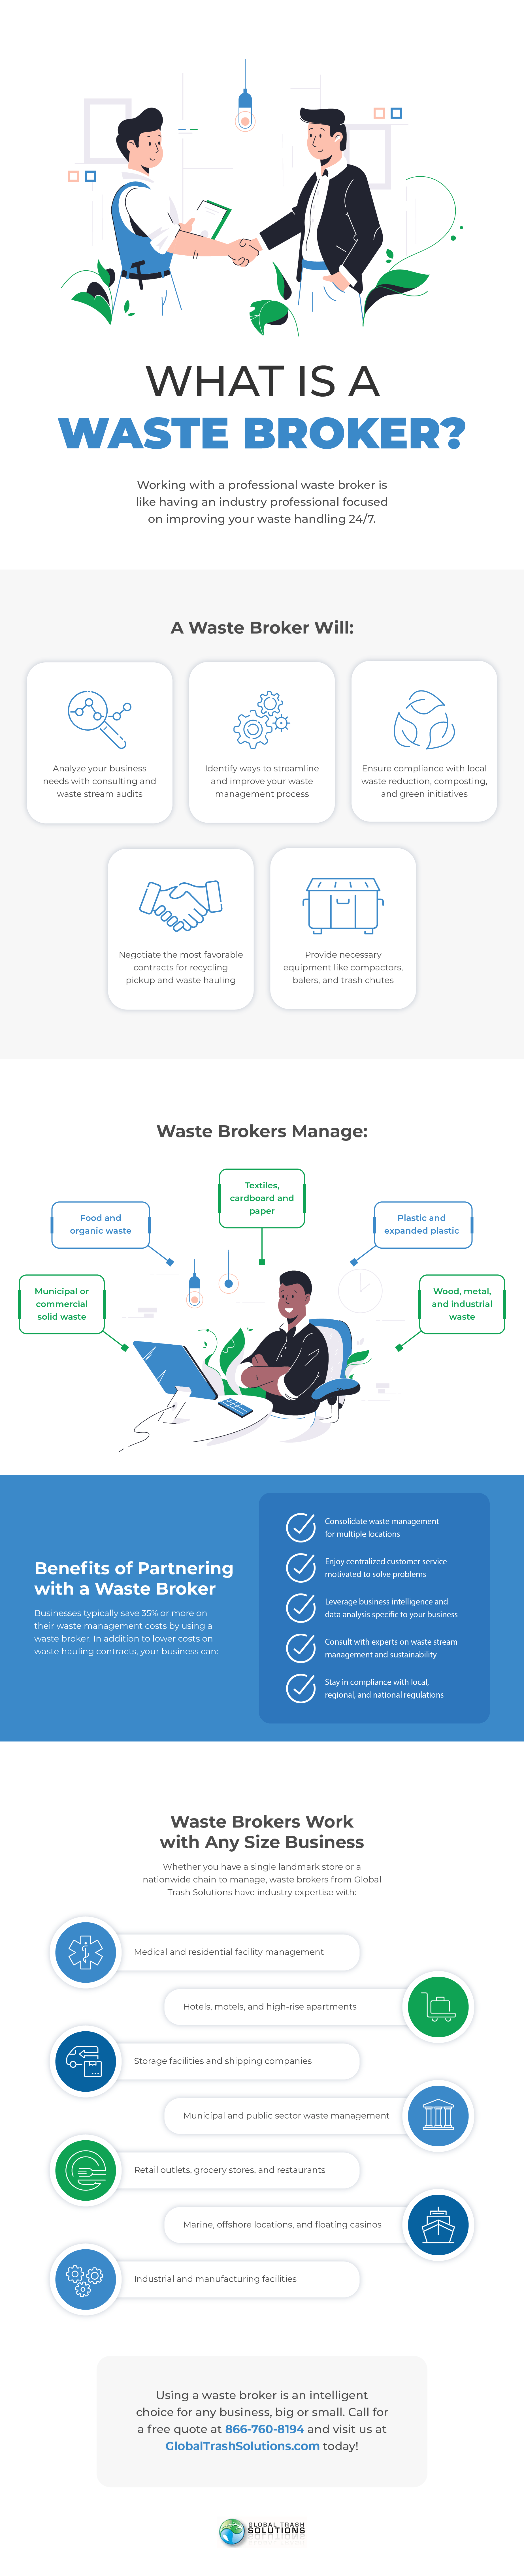 What Is a Waste Broker Infographic